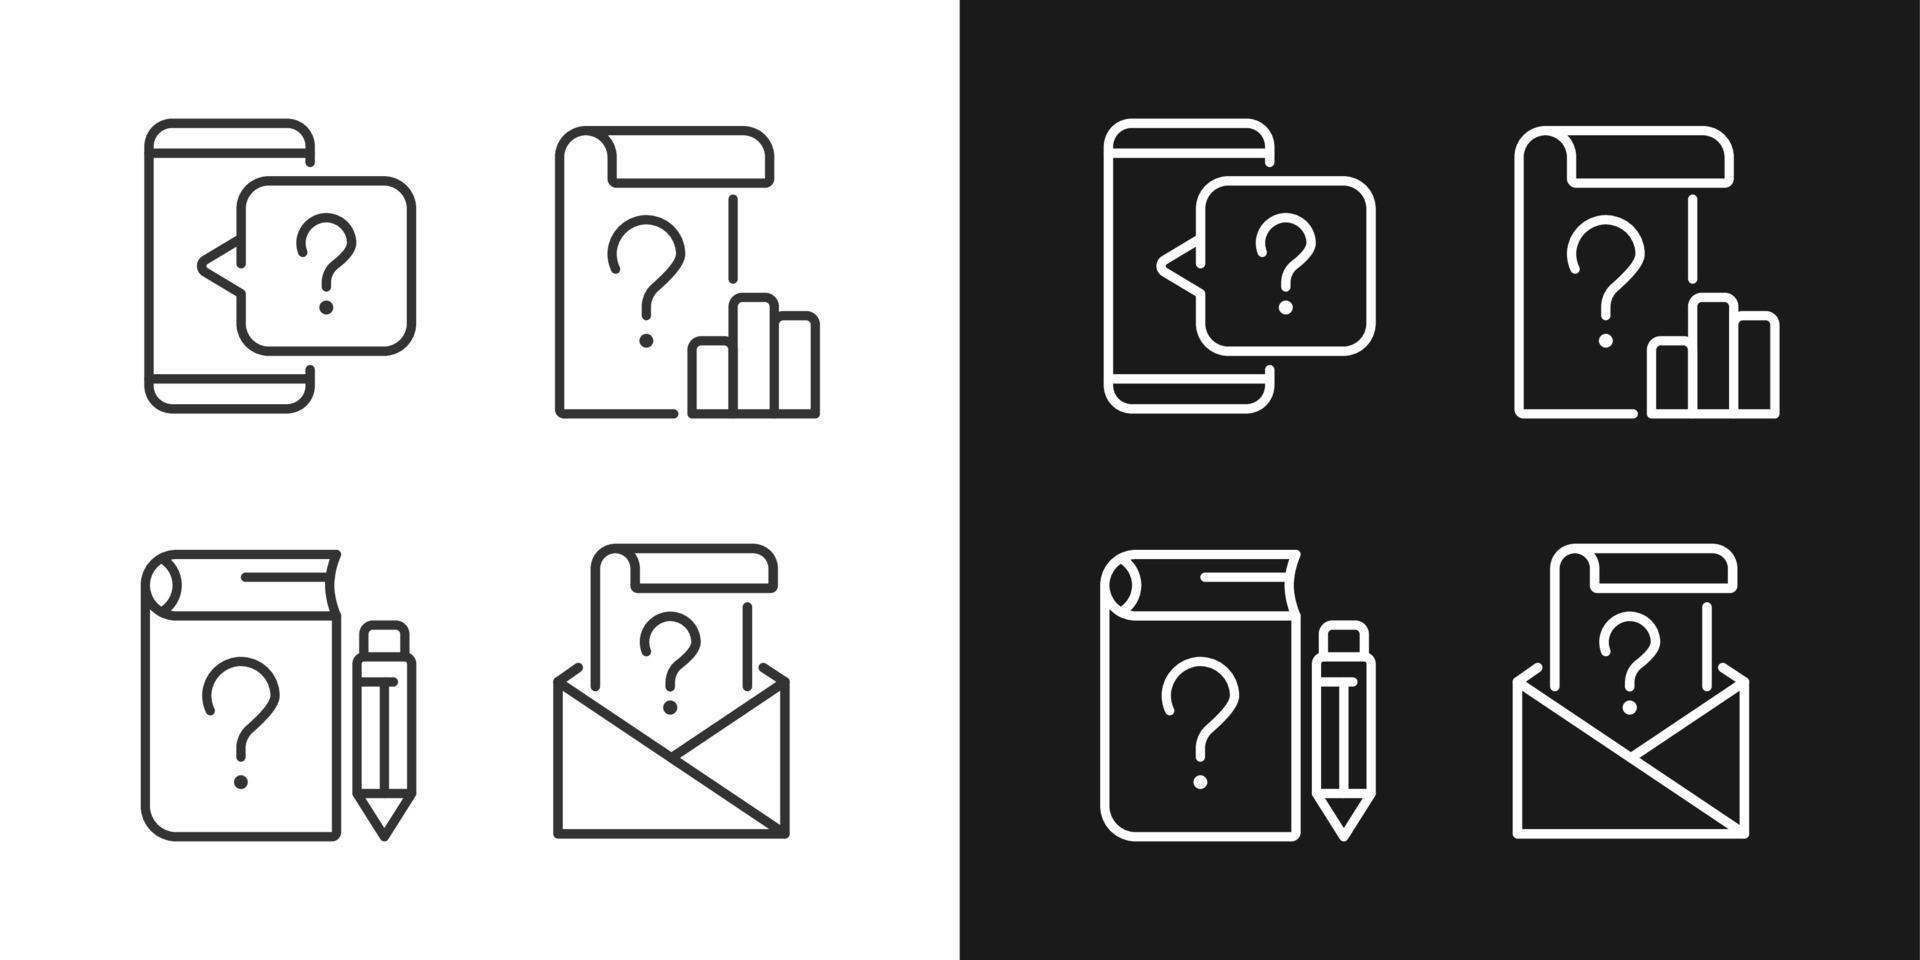 Questions in business and education linear icons set for dark, light mode. Information support service. Thin line symbols for night, day theme. Isolated illustrations. Editable stroke vector